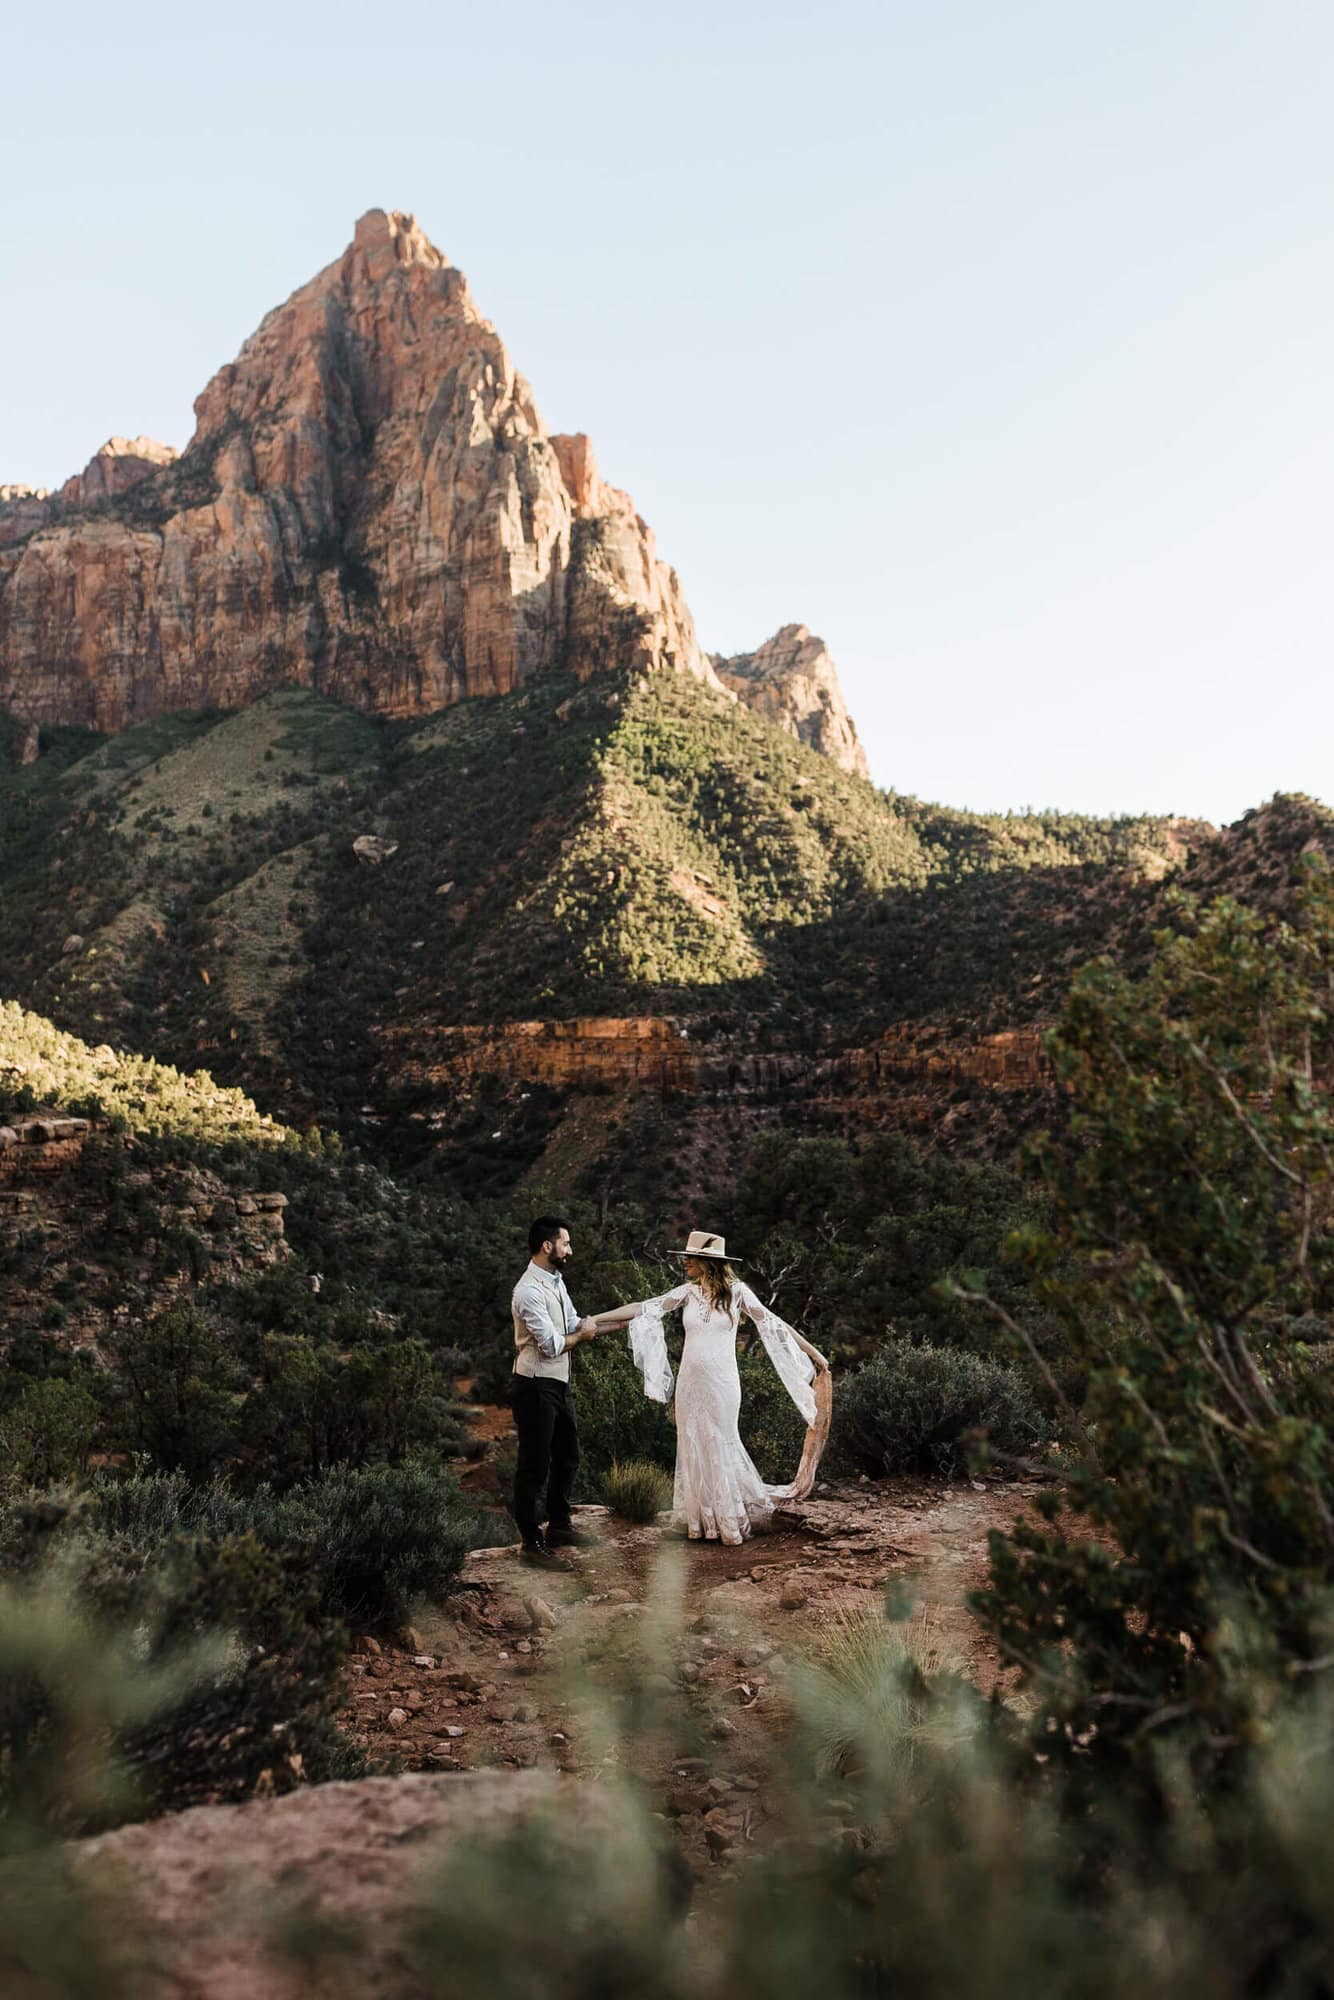 You have to consider these eight epic places to elope in Utah! If you love adventurous desert vibes check out these popular (and hidden gem!) spots.